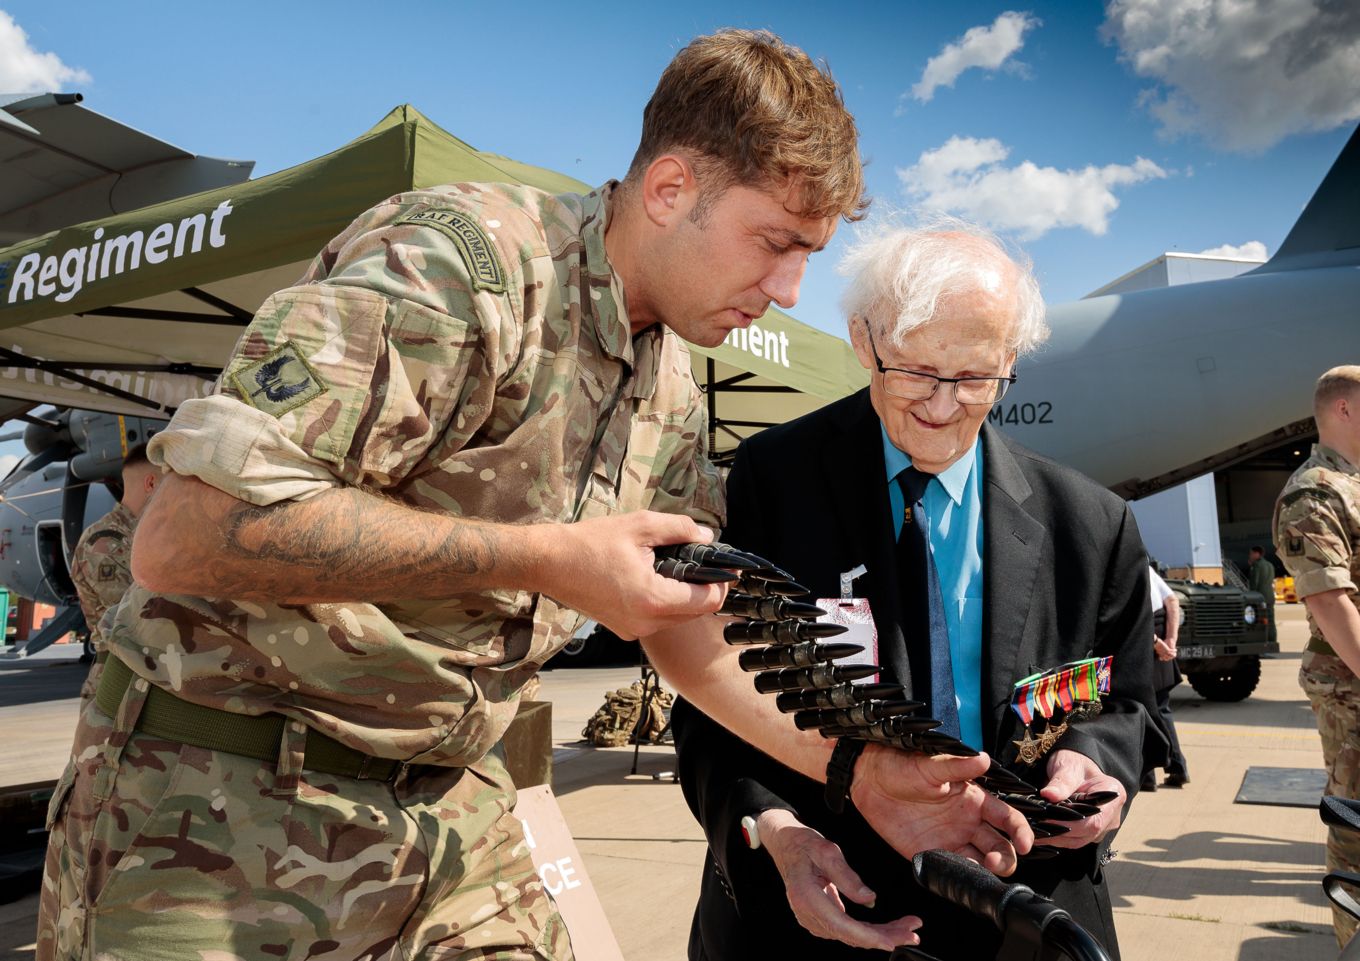 II Squadron RAF Regiment provided a stand of information and engaged with the visitors